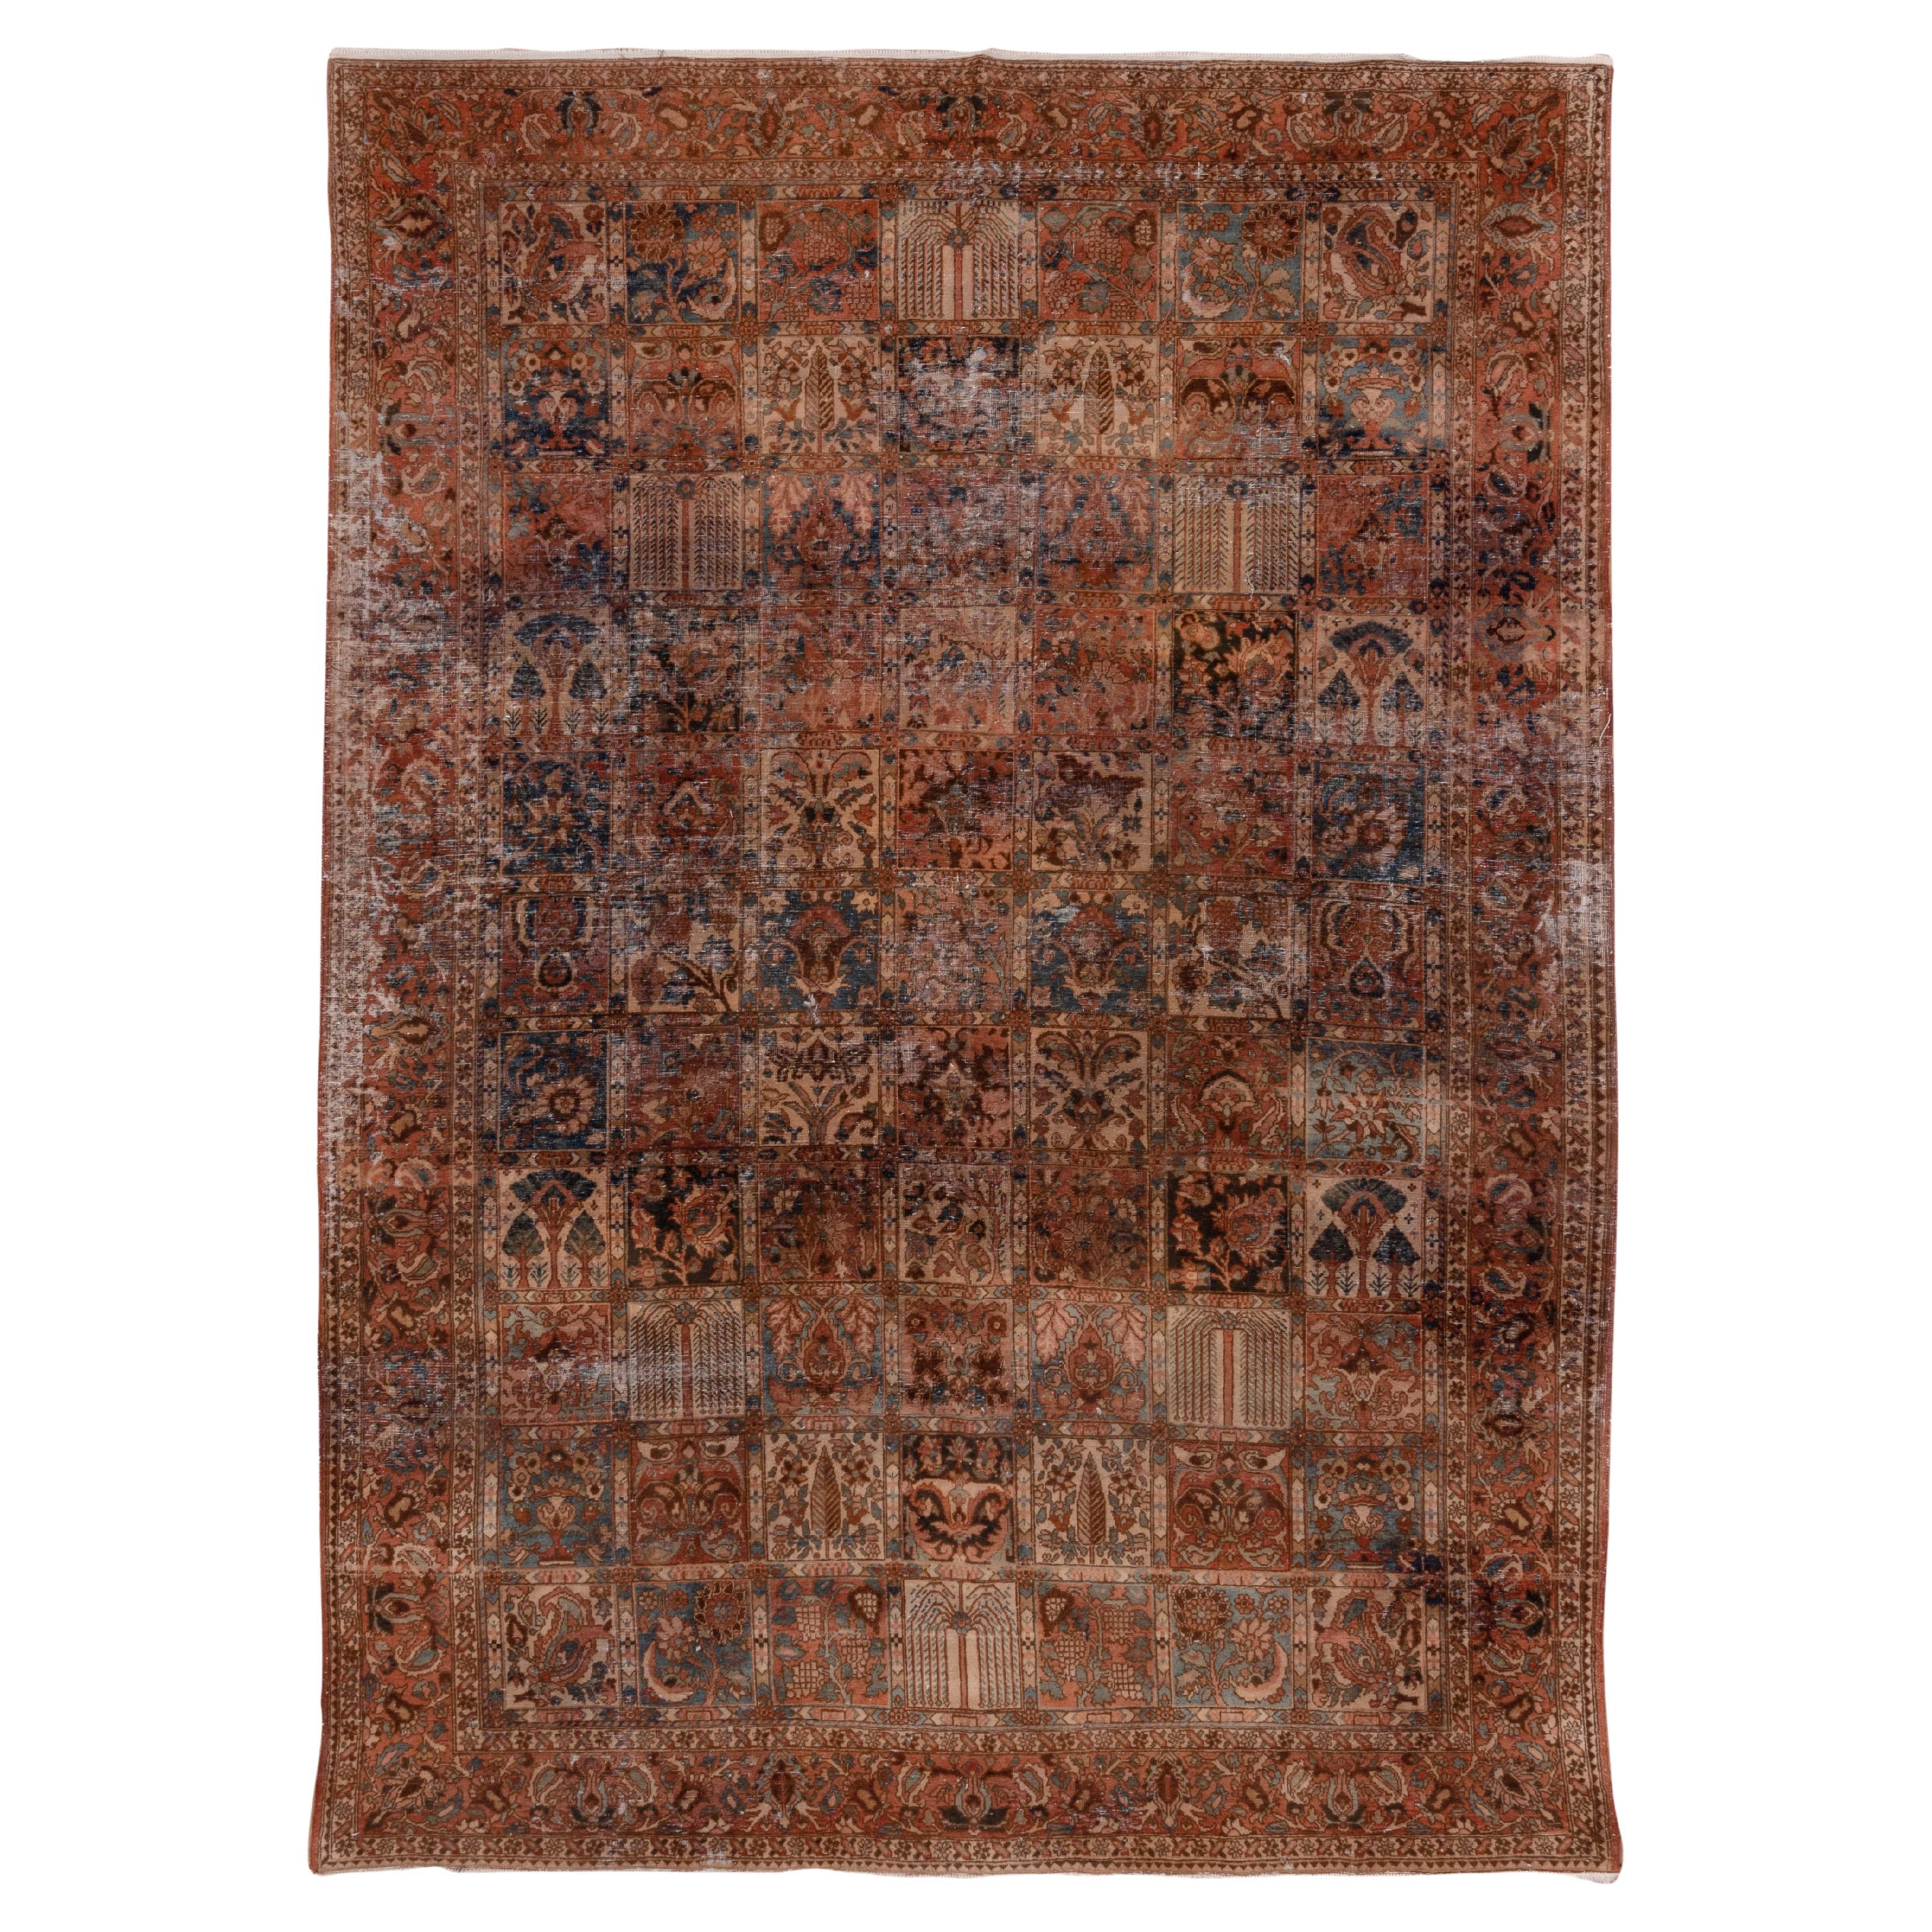 Eliko Rugs by David Ariel Antique Persian Bakhtiari Rug with Warm TOnes For Sale